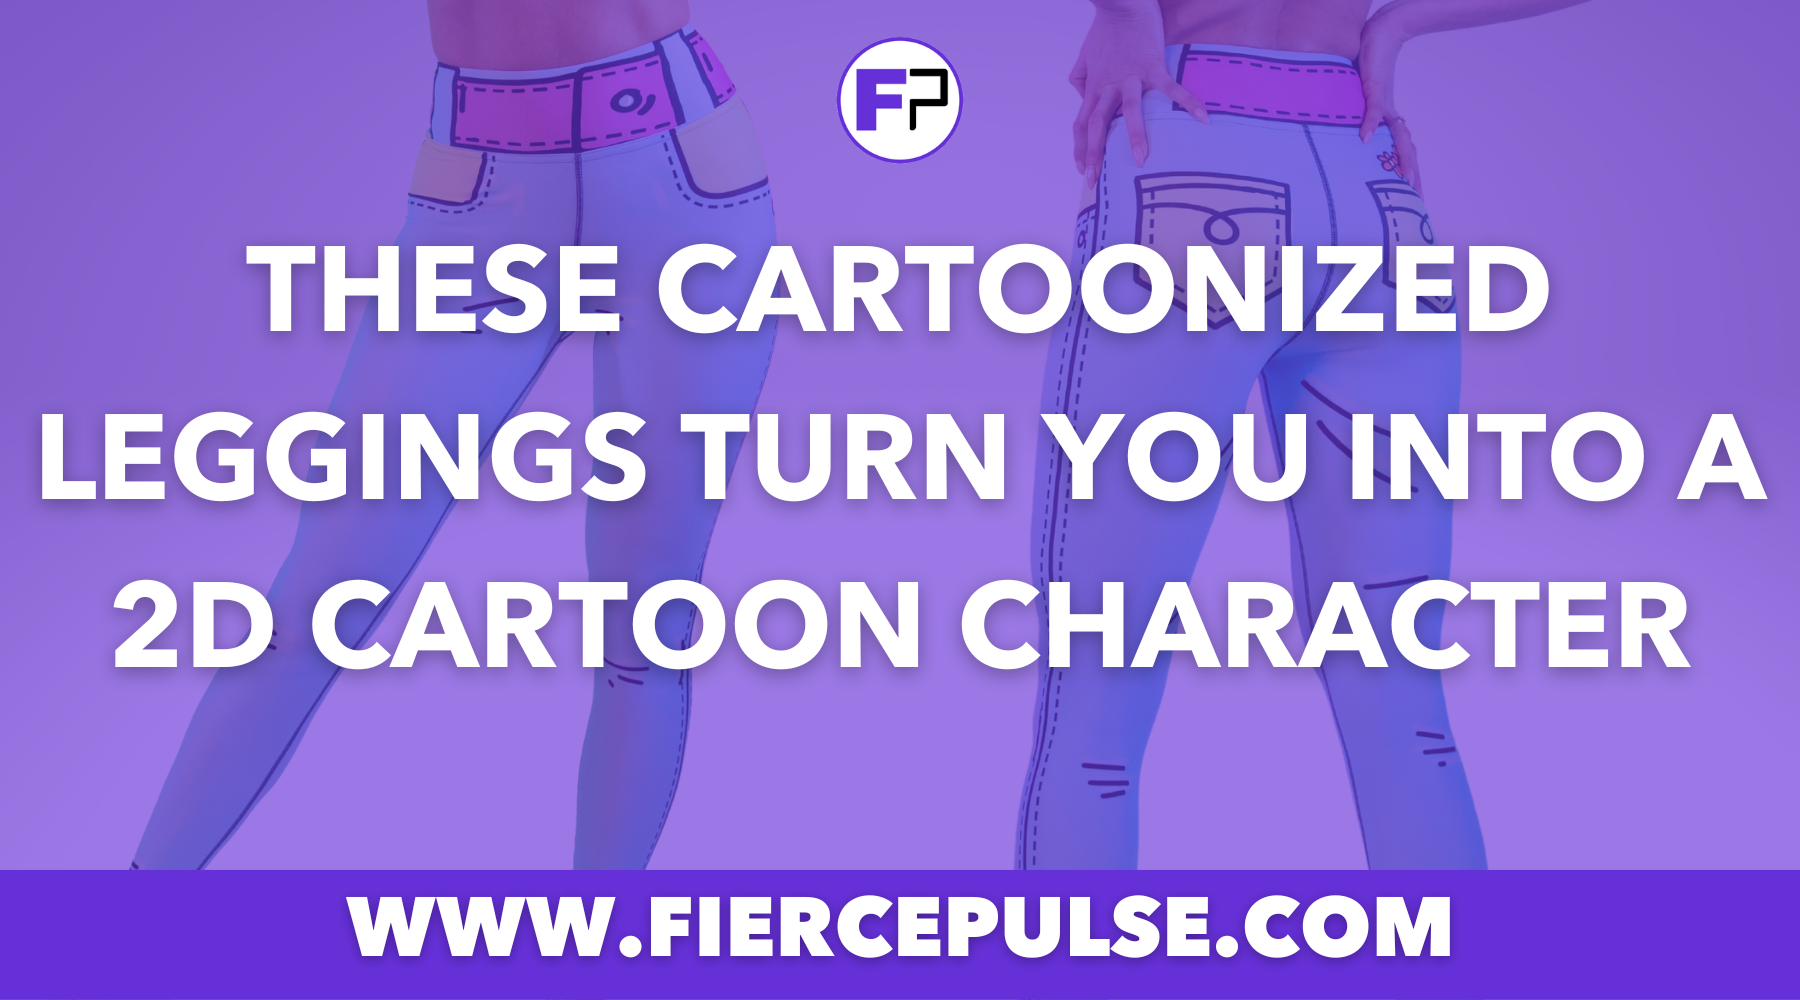 These Cartoonized Leggings Turn You Into a 2D Cartoon Character